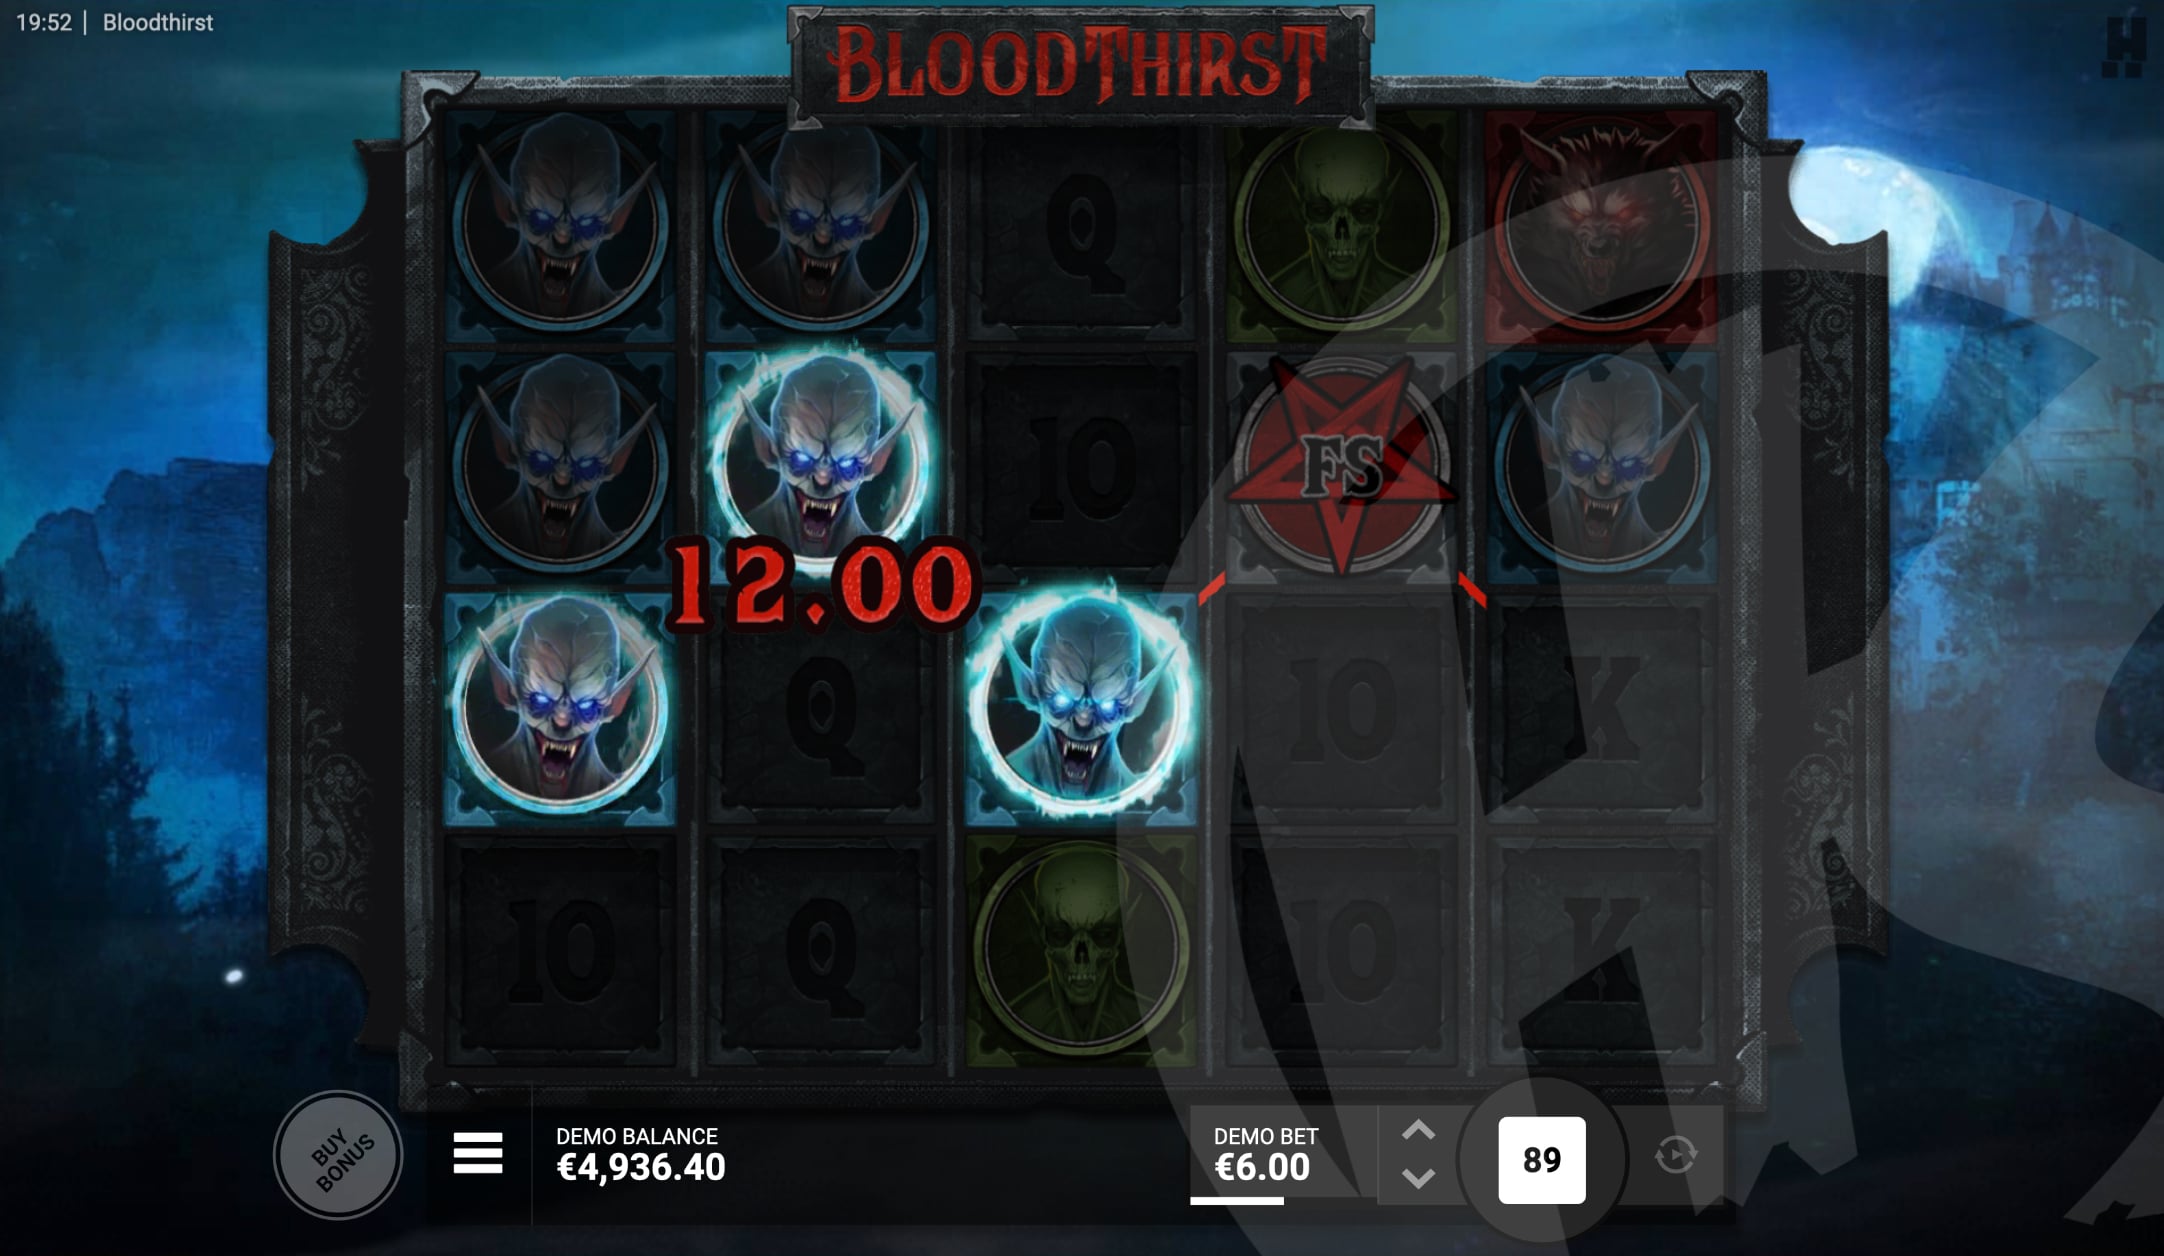 Bloodthirst Offers Players 10 Fixed Win Lines